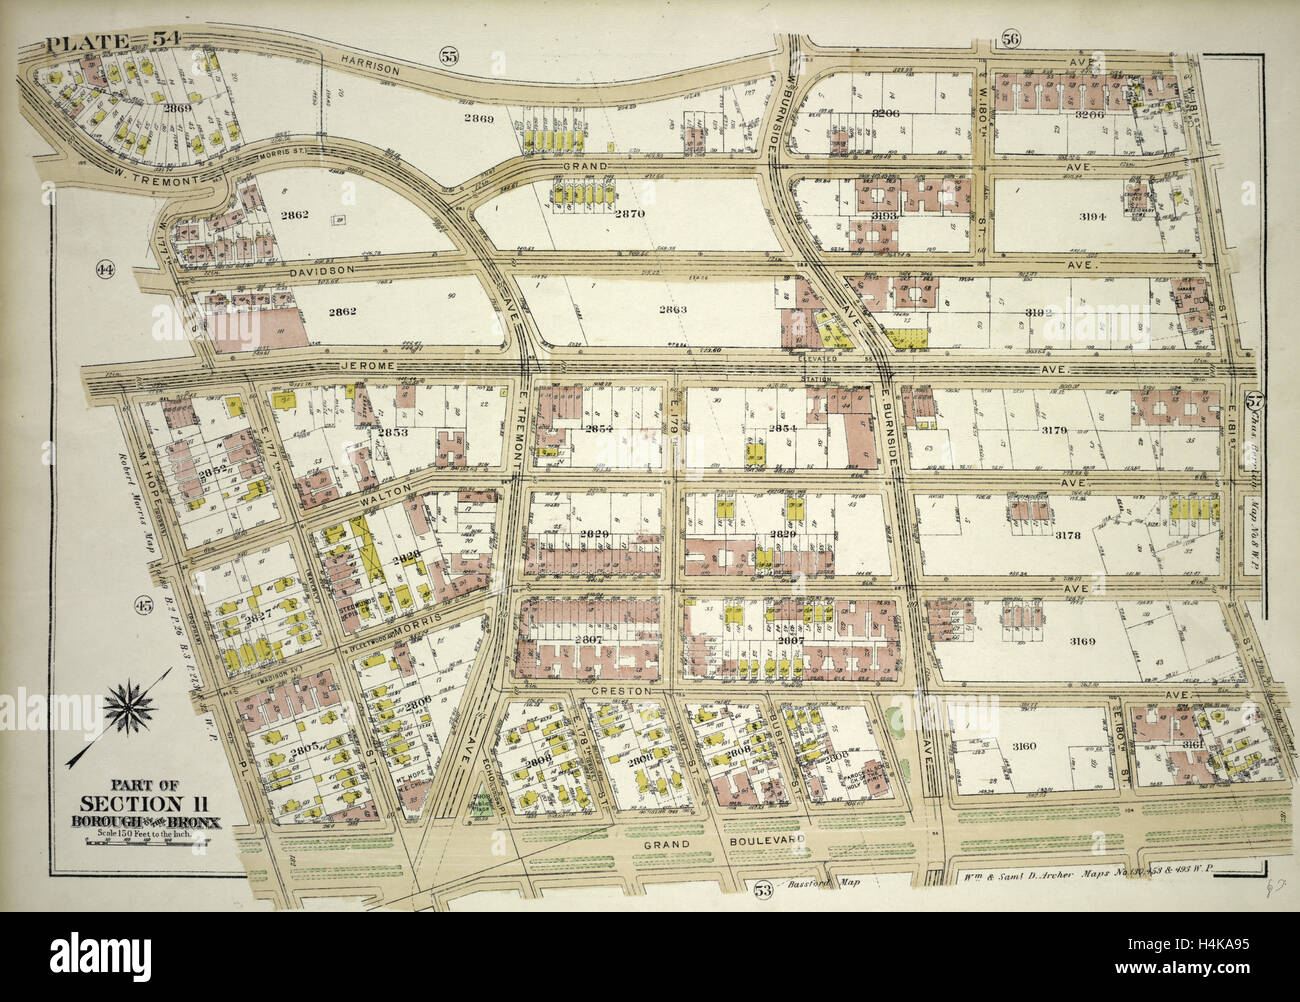 Plate 54, Part of Section 11, Borough of the Bronx. Bounded by Harrison Avenue, W. 181st Street, E. 181st Street Stock Photo